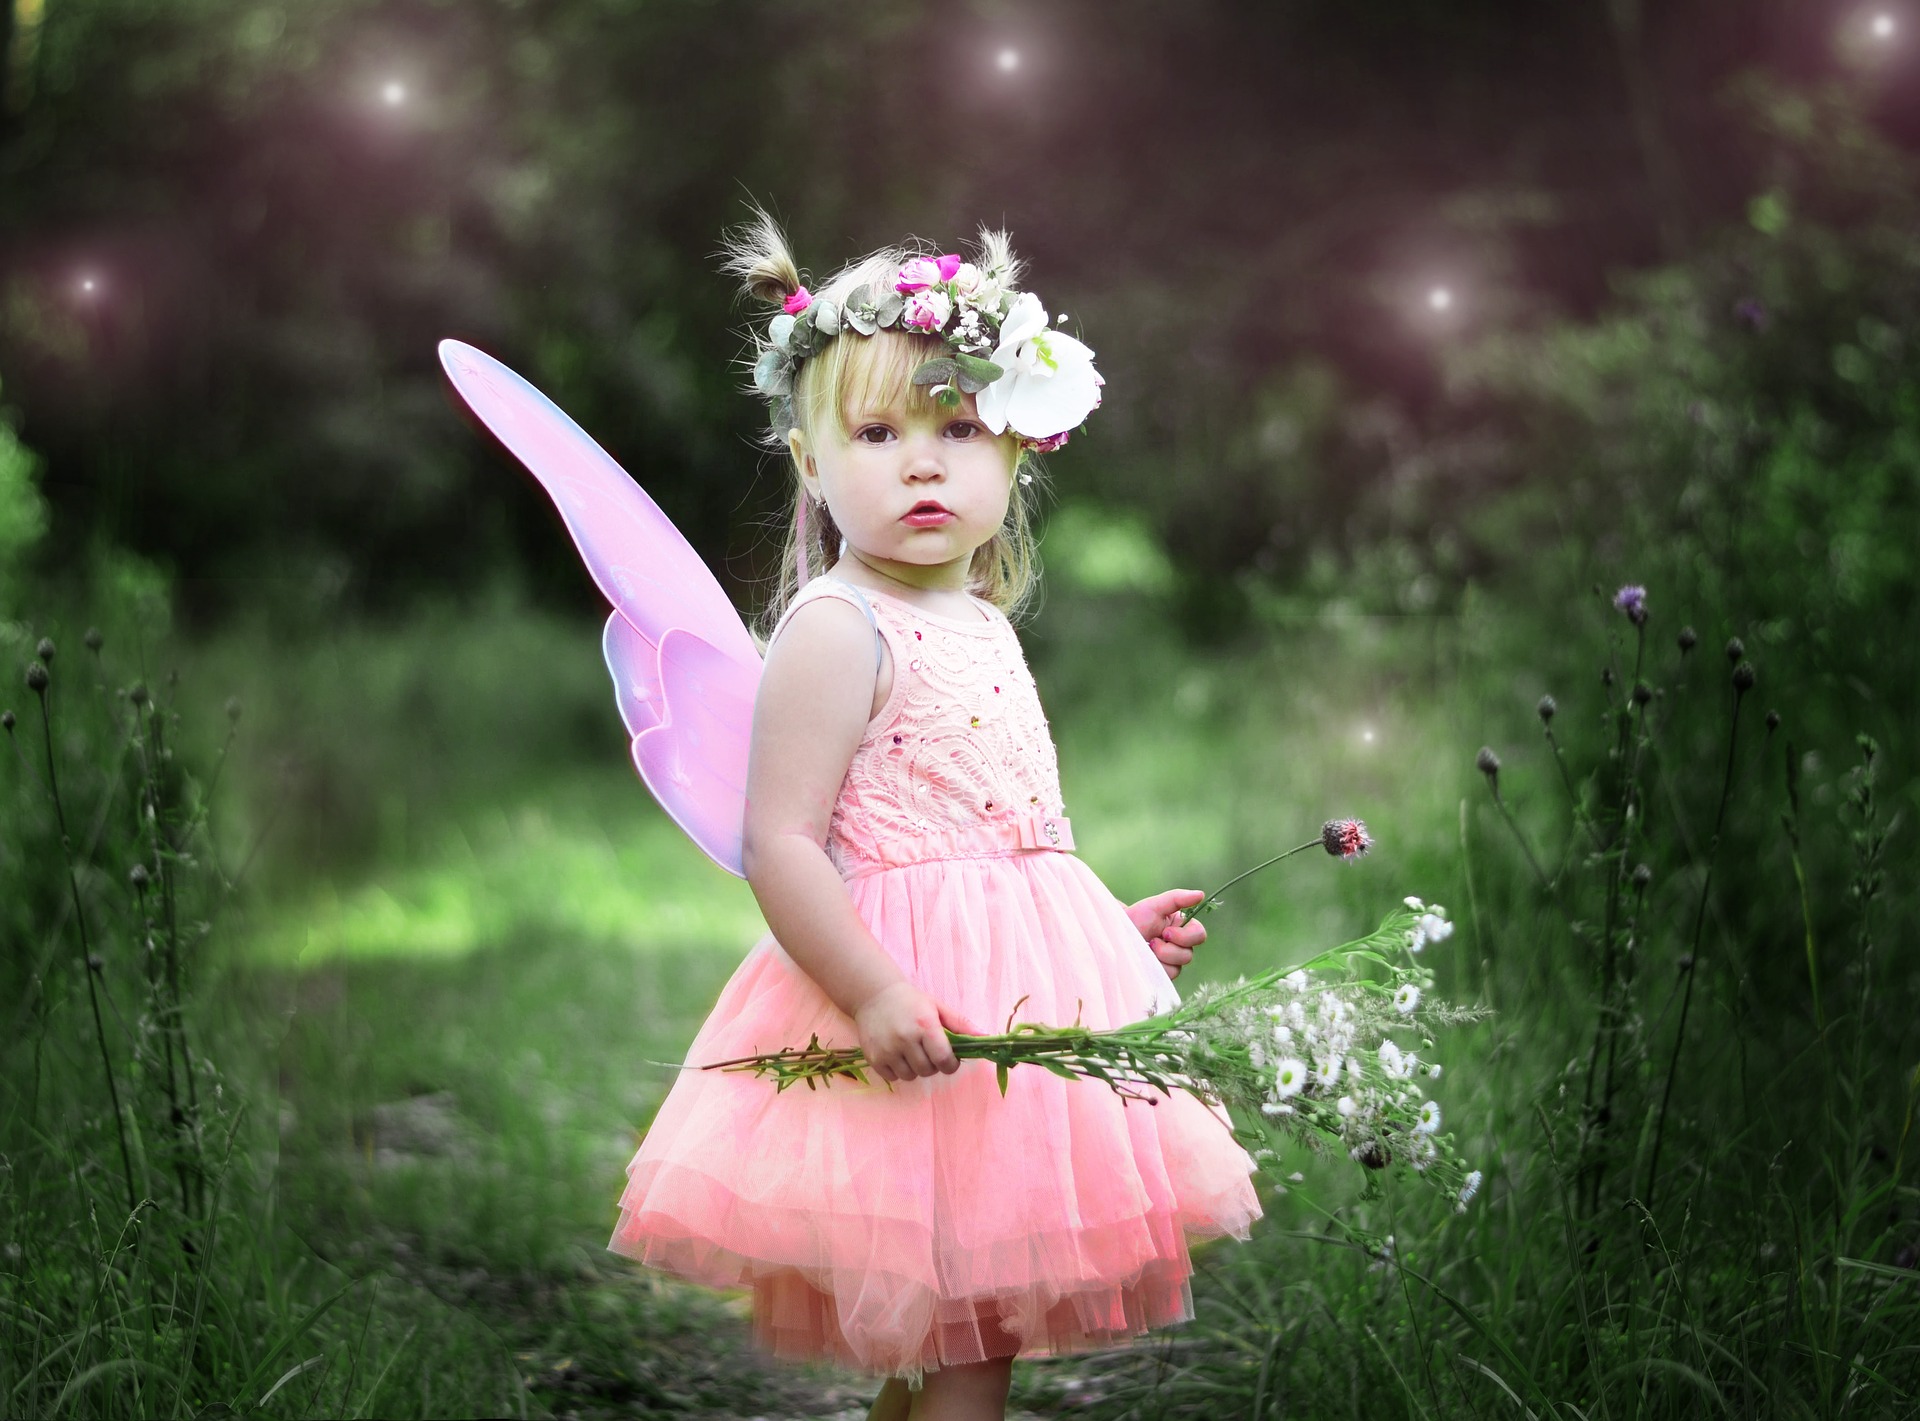 Toddler dressed as a fairy against a nature background